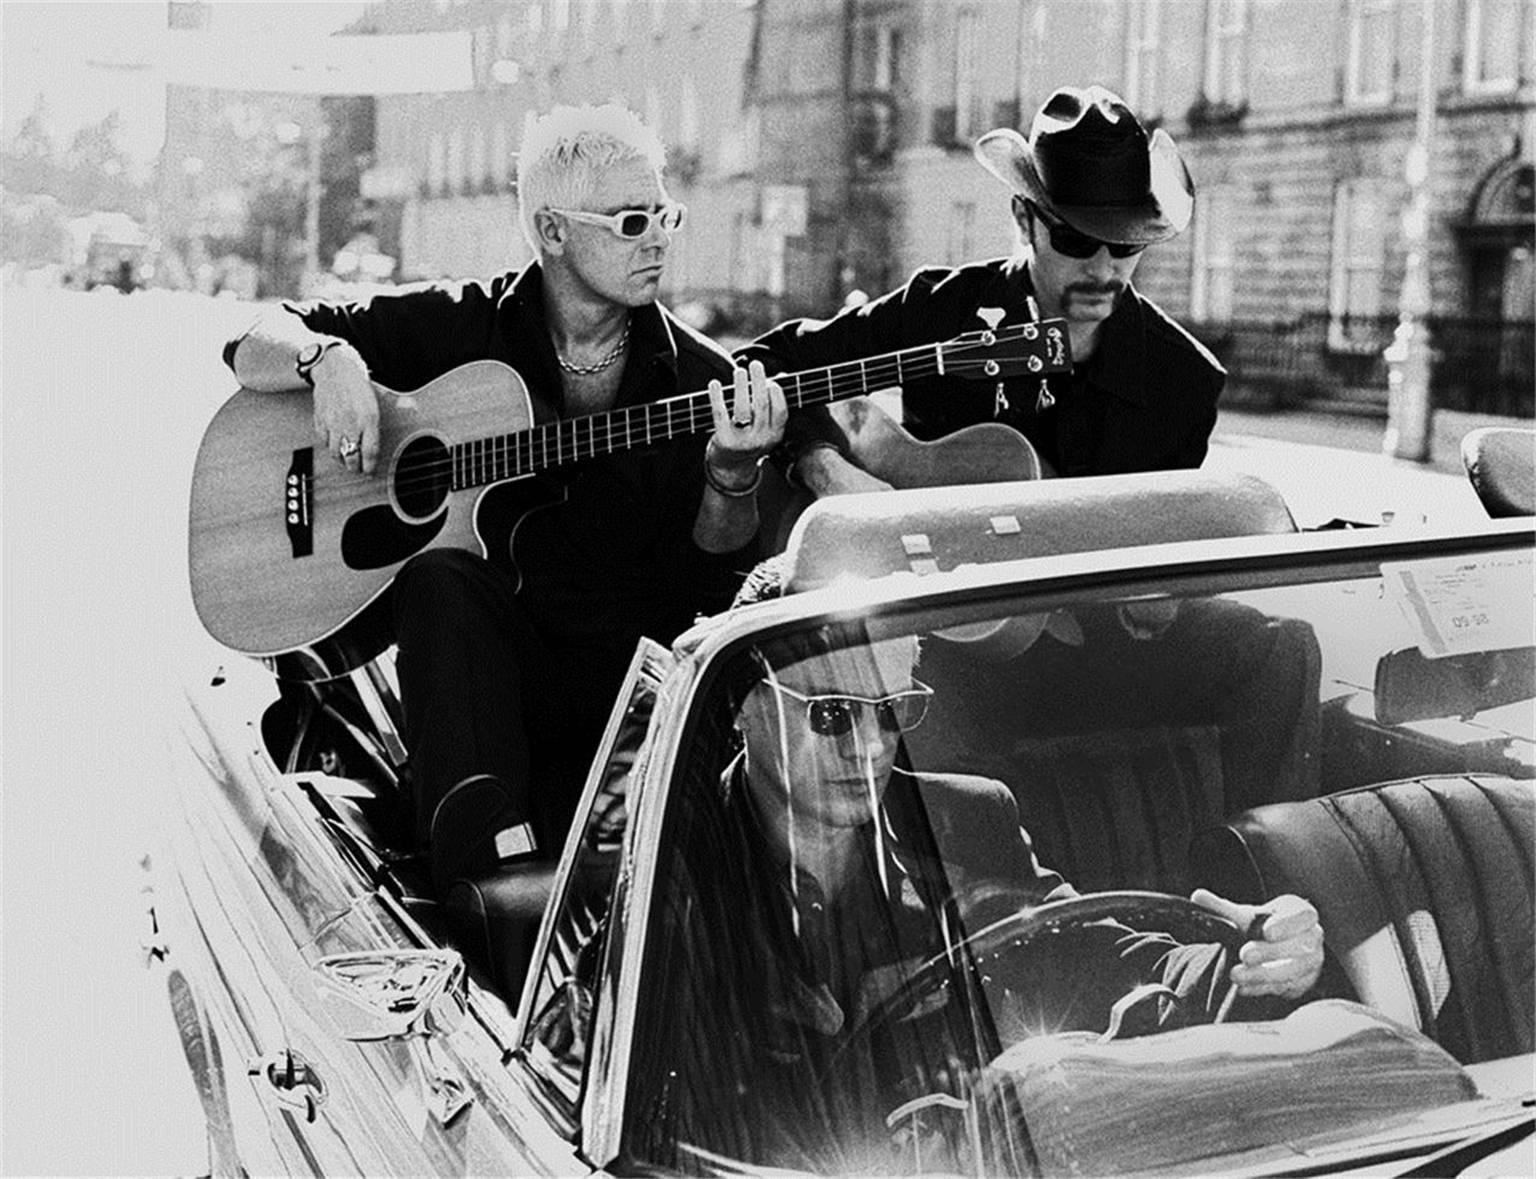 Colm Henry Black and White Photograph – U2, Dublin, Irland, 1998